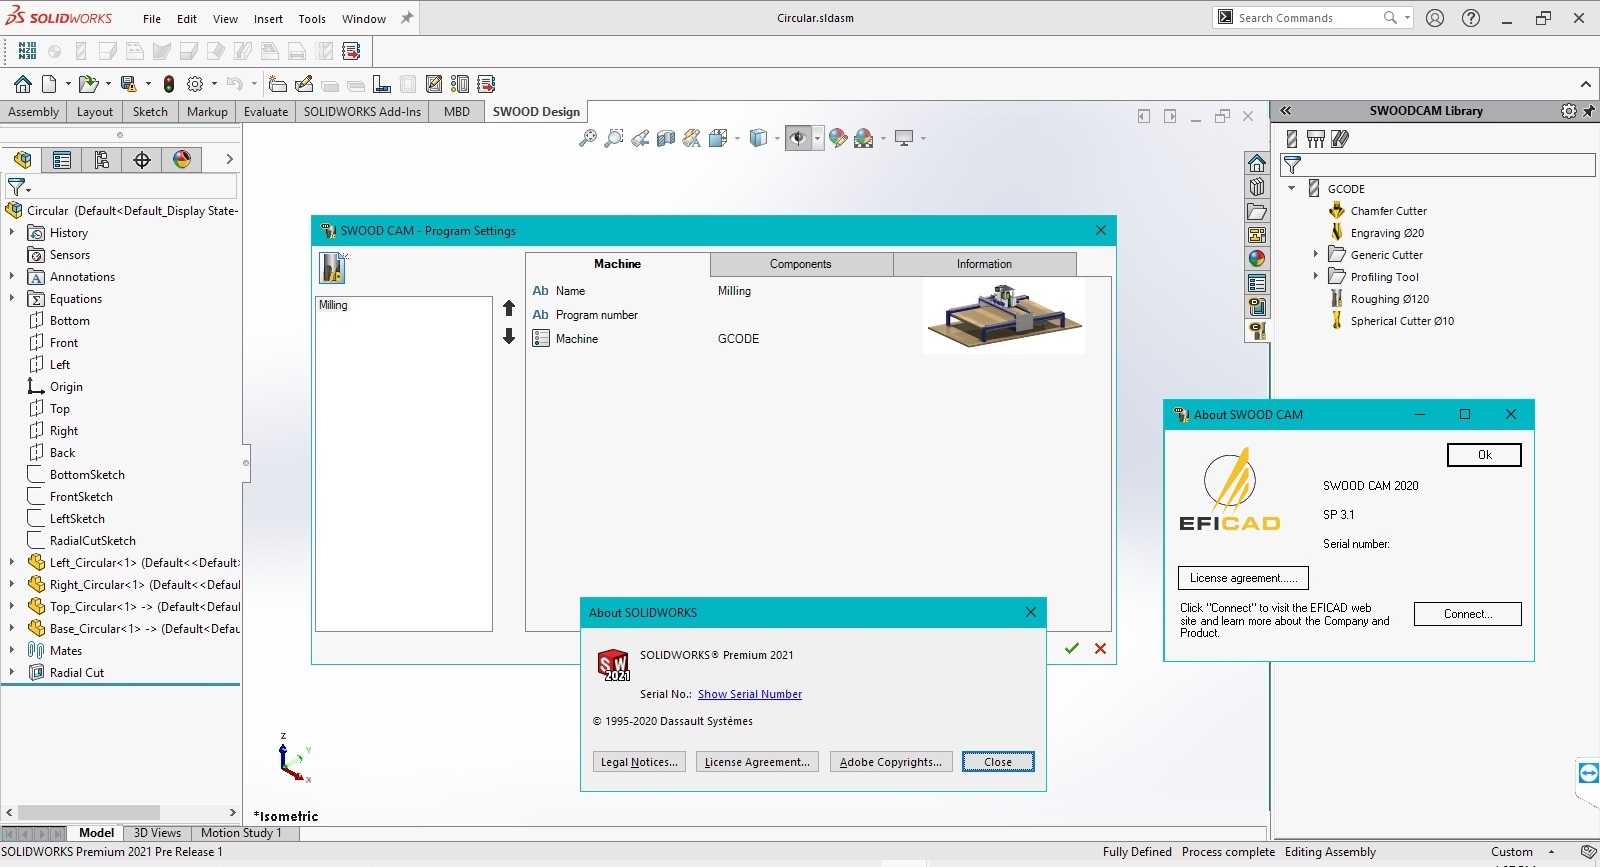 Working with SWOOD CAM 2020 SP3.1 for SolidWorks 2010-2021